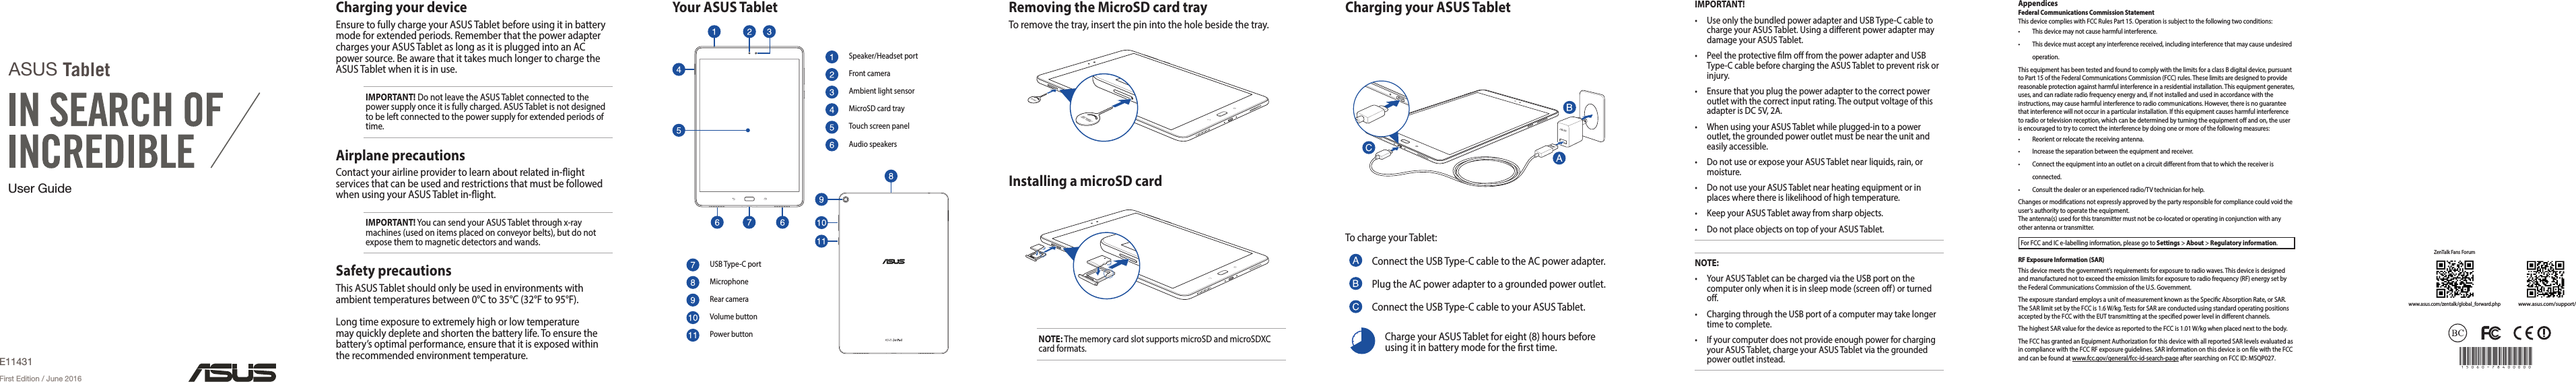 User GuideASUS TabletE11431First Edition / June 2016Charging your ASUS TabletTo charge your Tablet:Connect the USB Type-C cable to the AC power adapter.Plug the AC power adapter to a grounded power outlet.Connect the USB Type-C cable to your ASUS Tablet.Charge your ASUS Tablet for eight (8) hours before using it in battery mode for the rst time.Removing the MicroSD card trayTo remove the tray, insert the pin into the hole beside the tray.NOTE: The memory card slot supports microSD and microSDXC card formats.Charging your deviceEnsure to fully charge your ASUS Tablet before using it in battery mode for extended periods. Remember that the power adapter charges your ASUS Tablet as long as it is plugged into an AC power source. Be aware that it takes much longer to charge the ASUS Tablet when it is in use.IMPORTANT! Do not leave the ASUS Tablet connected to the power supply once it is fully charged. ASUS Tablet is not designed to be left connected to the power supply for extended periods of time.Airplane precautionsContact your airline provider to learn about related in-ight services that can be used and restrictions that must be followed when using your ASUS Tablet in-ight.IMPORTANT! You can send your ASUS Tablet through x-ray machines (used on items placed on conveyor belts), but do not expose them to magnetic detectors and wands.Safety precautionsThis ASUS Tablet should only be used in environments with ambient temperatures between 0°C to 35°C (32°F to 95°F).Long time exposure to extremely high or low temperature may quickly deplete and shorten the battery life. To ensure the battery’s optimal performance, ensure that it is exposed within the recommended environment temperature.Your ASUS TabletSpeaker/Headset portFront cameraAmbient light sensorMicroSD card trayTouch screen panelAudio speakersUSB Type-C portMicrophoneRear cameraVolume buttonPower buttonInstalling a microSD cardIMPORTANT!• UseonlythebundledpoweradapterandUSBType-Ccabletocharge your ASUS Tablet. Using a dierent power adapter may damage your ASUS Tablet.• PeeltheprotectivelmofromthepoweradapterandUSBType-C cable before charging the ASUS Tablet to prevent risk or injury.• Ensurethatyouplugthepoweradaptertothecorrectpoweroutlet with the correct input rating. The output voltage of this adapter is DC 5V, 2A.• WhenusingyourASUSTabletwhileplugged-intoapoweroutlet, the grounded power outlet must be near the unit and easily accessible.• DonotuseorexposeyourASUSTabletnearliquids,rain,ormoisture.• DonotuseyourASUSTabletnearheatingequipmentorinplaces where there is likelihood of high temperature.• KeepyourASUSTabletawayfromsharpobjects.• DonotplaceobjectsontopofyourASUSTablet.NOTE:• YourASUSTabletcanbechargedviatheUSBportonthecomputer only when it is in sleep mode (screen o) or turned o.• ChargingthroughtheUSBportofacomputermaytakelongertime to complete.• Ifyourcomputerdoesnotprovideenoughpowerforchargingyour ASUS Tablet, charge your ASUS Tablet via the grounded power outlet instead.AppendicesFederal Communications Commission StatementThis device complies with FCC Rules Part 15. Operation is subject to the following two conditions:• Thisdevicemaynotcauseharmfulinterference.• Thisdevicemustacceptanyinterferencereceived,includinginterferencethatmaycauseundesiredoperation.This equipment has been tested and found to comply with the limits for a class B digital device, pursuant to Part 15 of the Federal Communications Commission (FCC) rules. These limits are designed to provide reasonable protection against harmful interference in a residential installation. This equipment generates, uses, and can radiate radio frequency energy and, if not installed and used in accordance with the instructions, may cause harmful interference to radio communications. However, there is no guarantee thatinterferencewillnotoccurinaparticularinstallation.Ifthisequipmentcausesharmfulinterferenceto radio or television reception, which can be determined by turning the equipment o and on, the user is encouraged to try to correct the interference by doing one or more of the following measures:• Reorientorrelocatethereceivingantenna.• Increasetheseparationbetweentheequipmentandreceiver.• Connecttheequipmentintoanoutletonacircuitdierentfromthattowhichthereceiverisconnected.• Consultthedealeroranexperiencedradio/TVtechnicianforhelp.Changes or modications not expressly approved by the party responsible for compliance could void the user‘s authority to operate the equipment.The antenna(s) used for this transmitter must not be co-located or operating in conjunction with any other antenna or transmitter.ForFCCandICe-labellinginformation,pleasegotoSettings &gt; About &gt; Regulatory information.RF Exposure Information (SAR)This device meets the government’s requirements for exposure to radio waves. This device is designed and manufactured not to exceed the emission limits for exposure to radio frequency (RF) energy set by the Federal Communications Commission of the U.S. Government.The exposure standard employs a unit of measurement known as the Specic Absorption Rate, or SAR. TheSARlimitsetbytheFCCis1.6W/kg.TestsforSARareconductedusingstandardoperatingpositionsaccepted by the FCC with the EUT transmitting at the specied power level in dierent channels.ThehighestSARvalueforthedeviceasreportedtotheFCCis1.01W/kgwhenplacednexttothebody.The FCC has granted an Equipment Authorization for this device with all reported SAR levels evaluated as in compliance with the FCC RF exposure guidelines. SAR information on this device is on le with the FCC and can be found at www.fcc.gov/general/fcc-id-search-pageaftersearchingonFCCID:MSQP027.15060-78400000ZenTalk Fans Forumwww.asus.com/zentalk/global_forward.phpwww.asus.com/support/